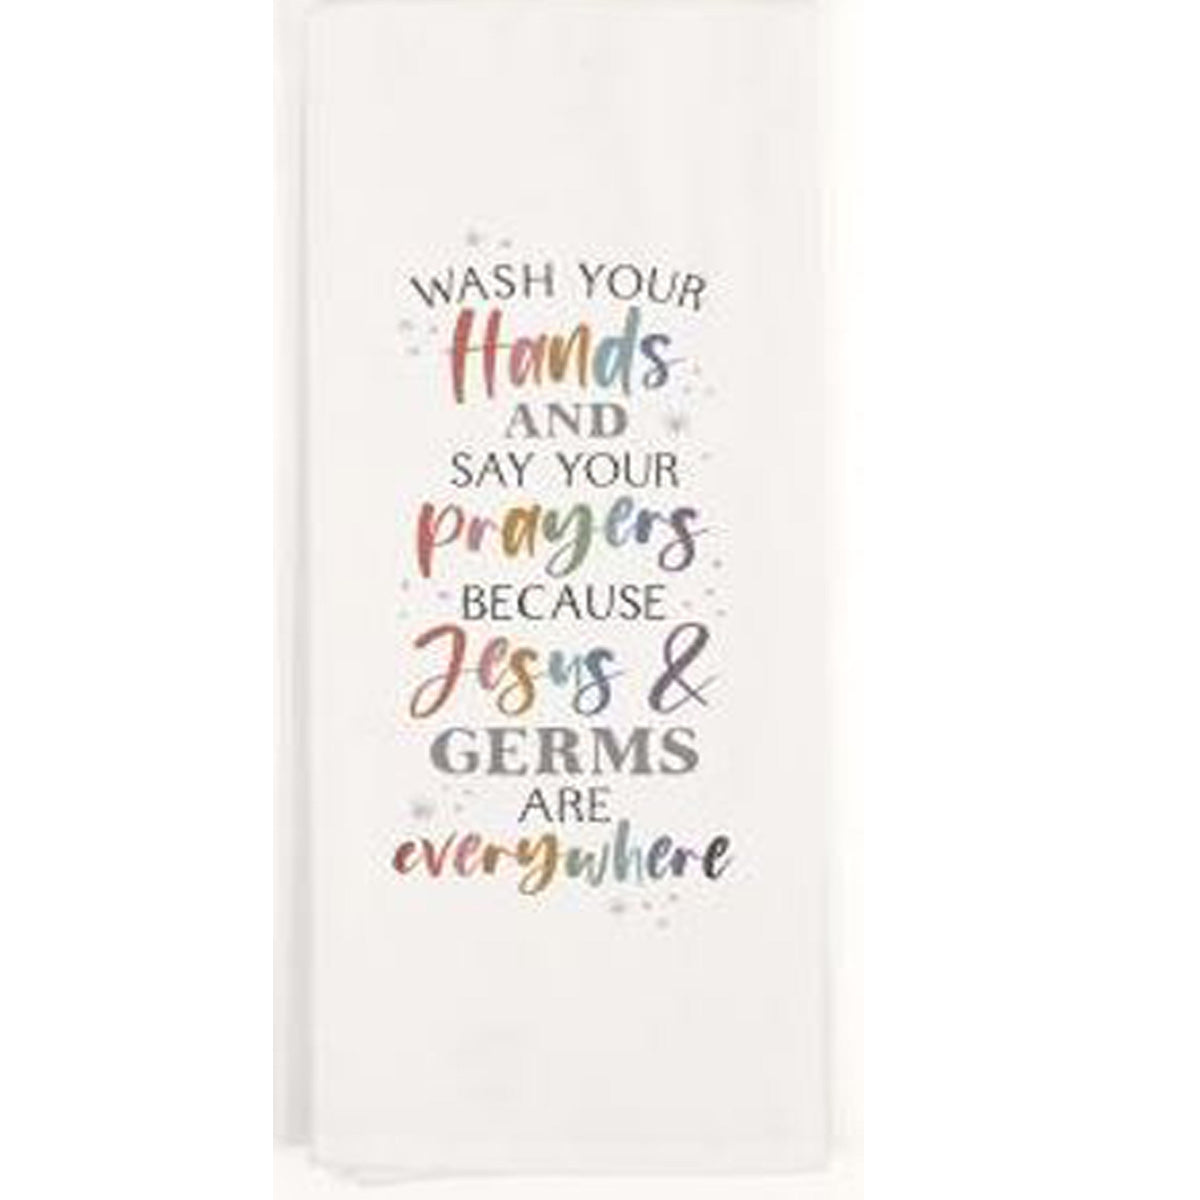 TEA TOWEL - Wash Your Hands And Say Your Prayers - Southern Grace Creations